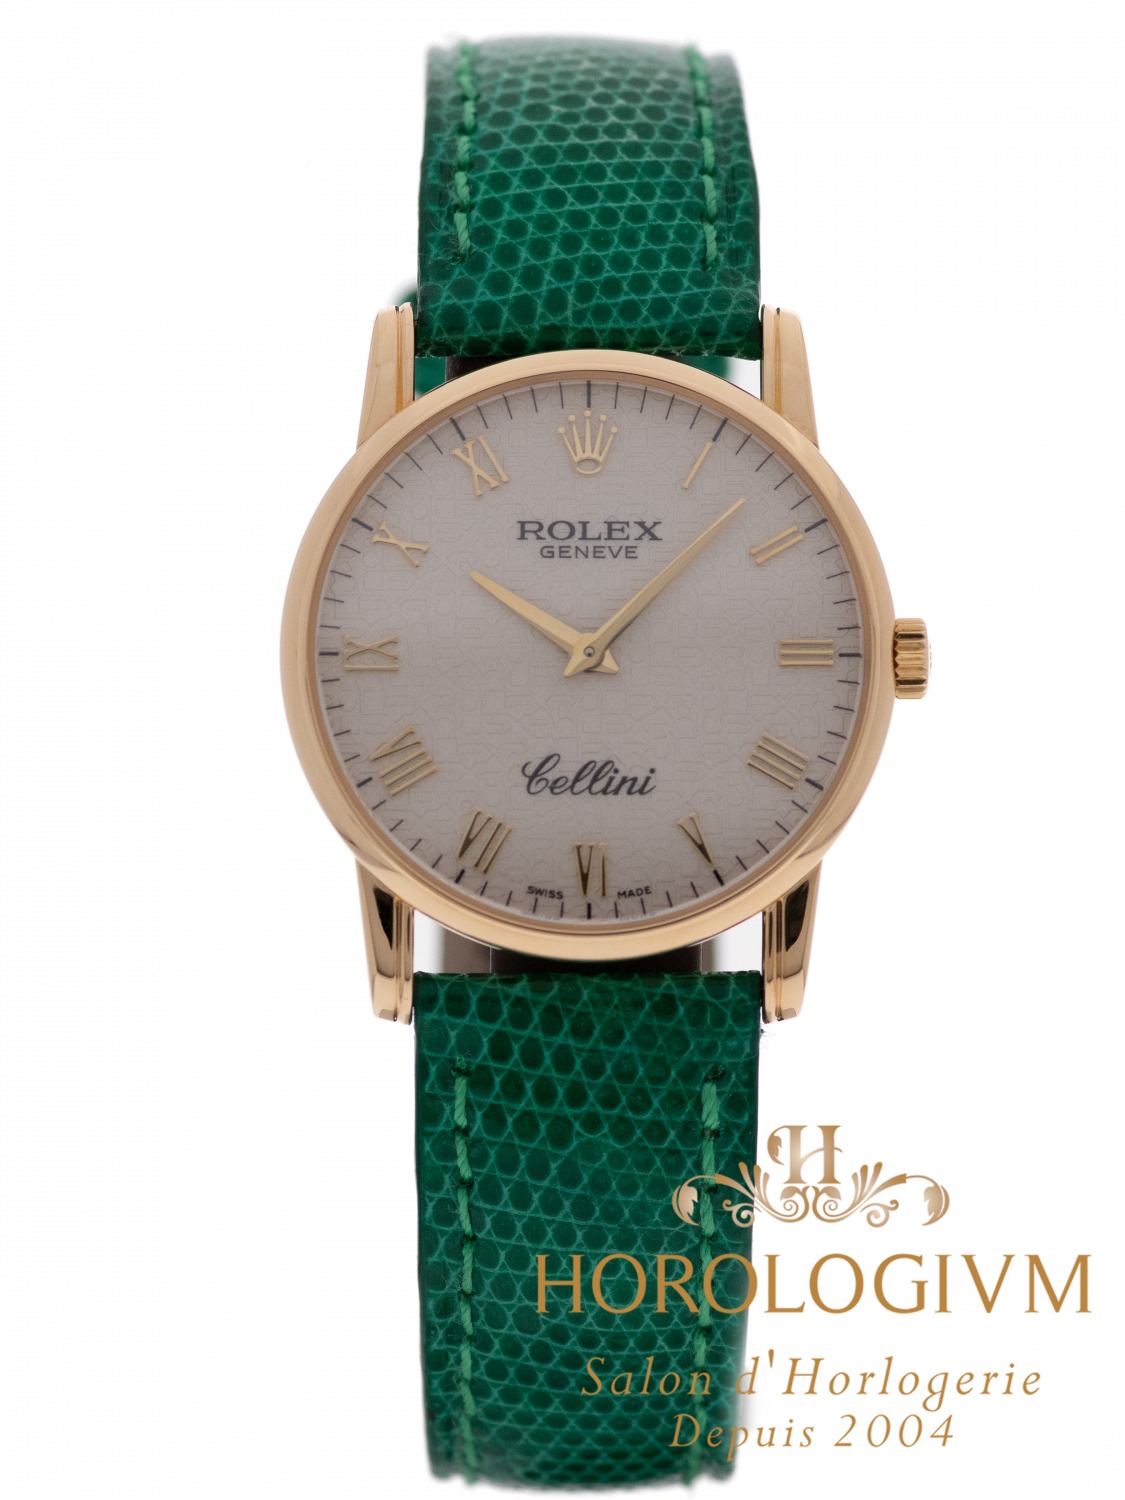 Rolex Cellini Classic Yellow Gold 32MM watch, yellow gold